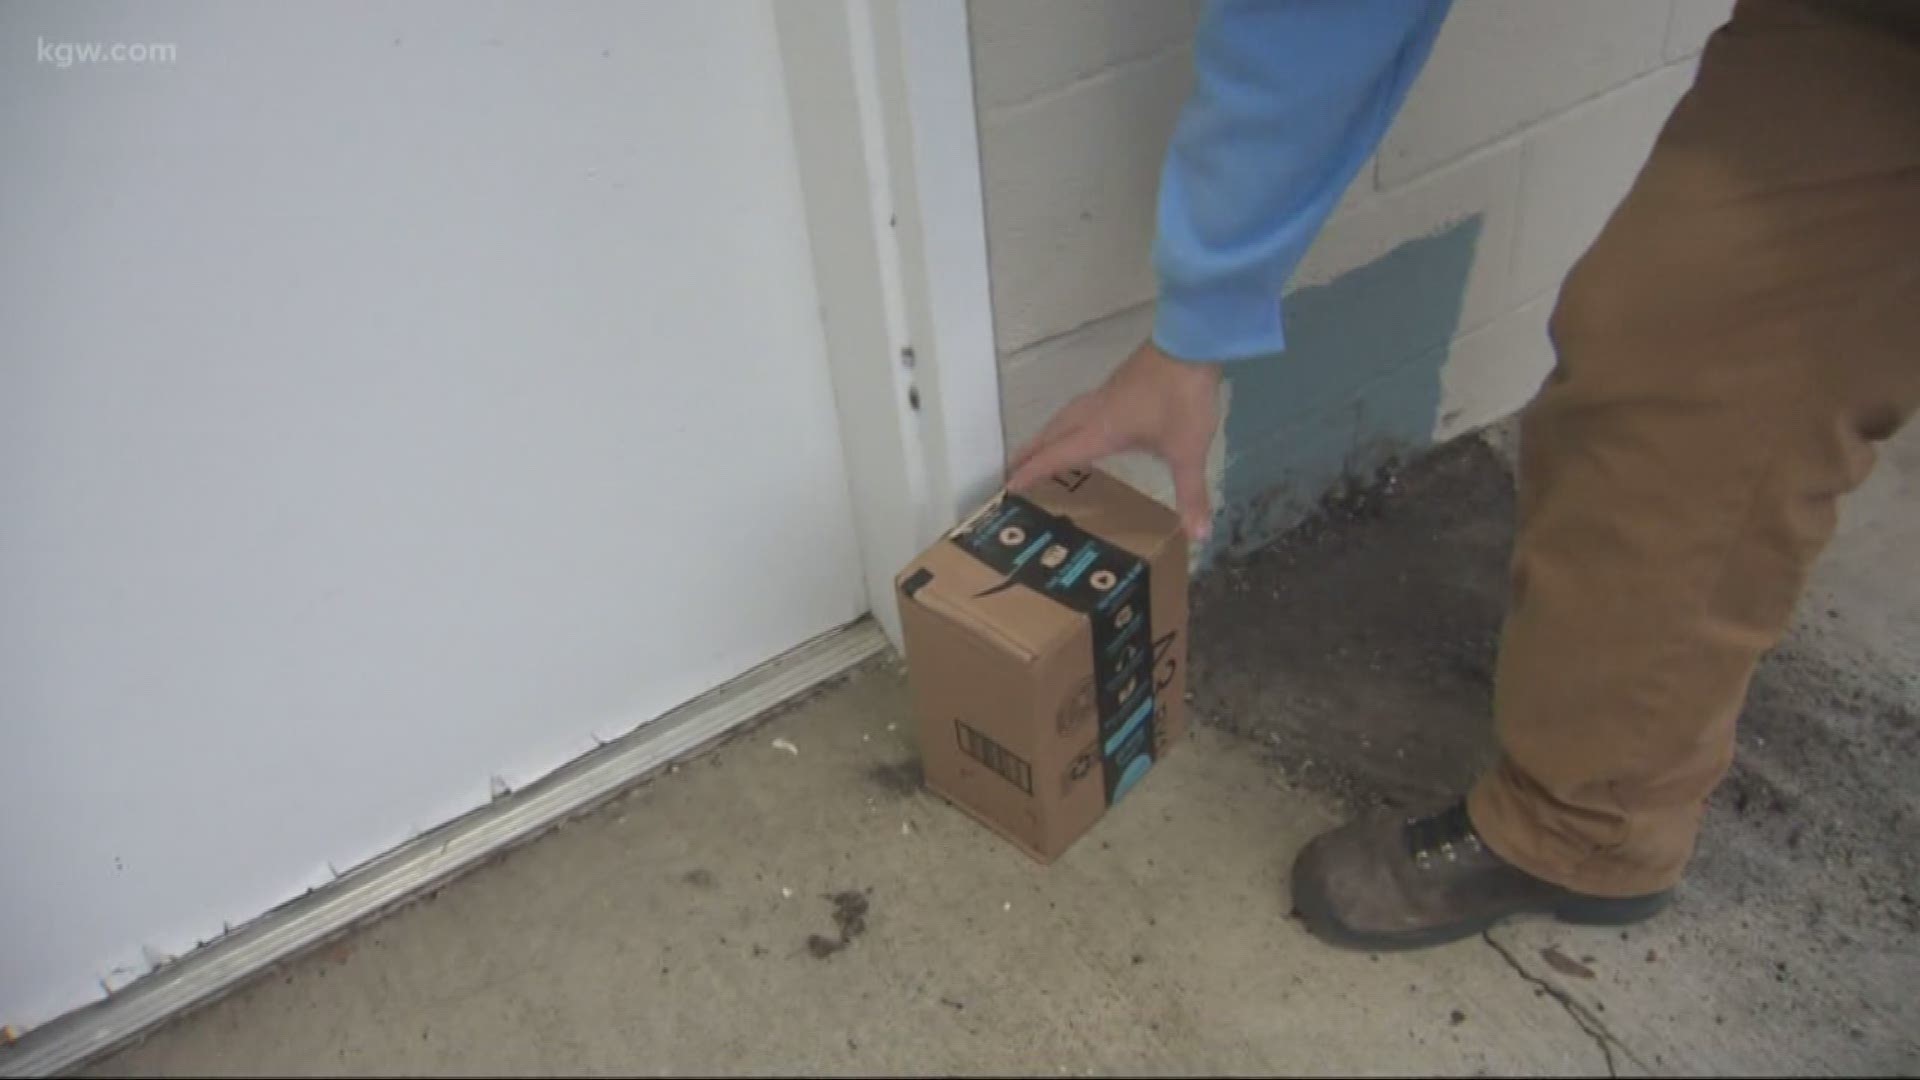 Stopping porch pirates. Here’s how the Washington County Sheriff’s Office is prepared to stop package thefts.